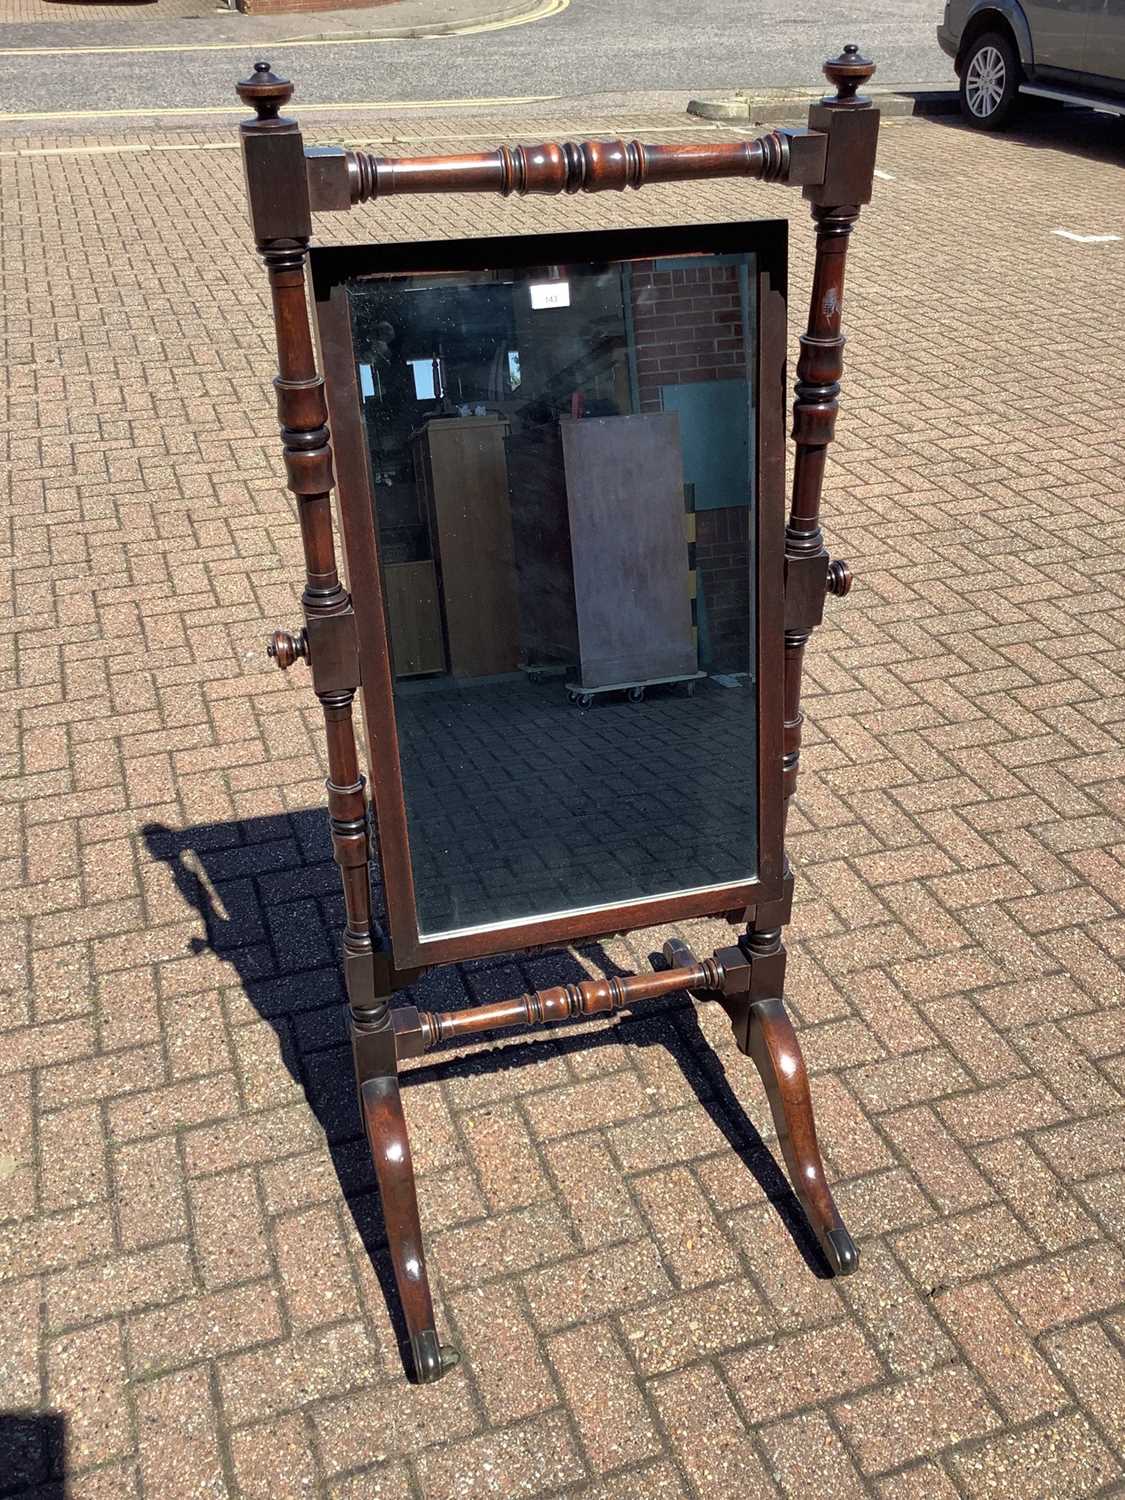 Lot 143 - Victorian mahogany framed cheval mirror with bevelled mirror plate and turned supports on splayed legs, 61.5cm wide x 146.5cm high